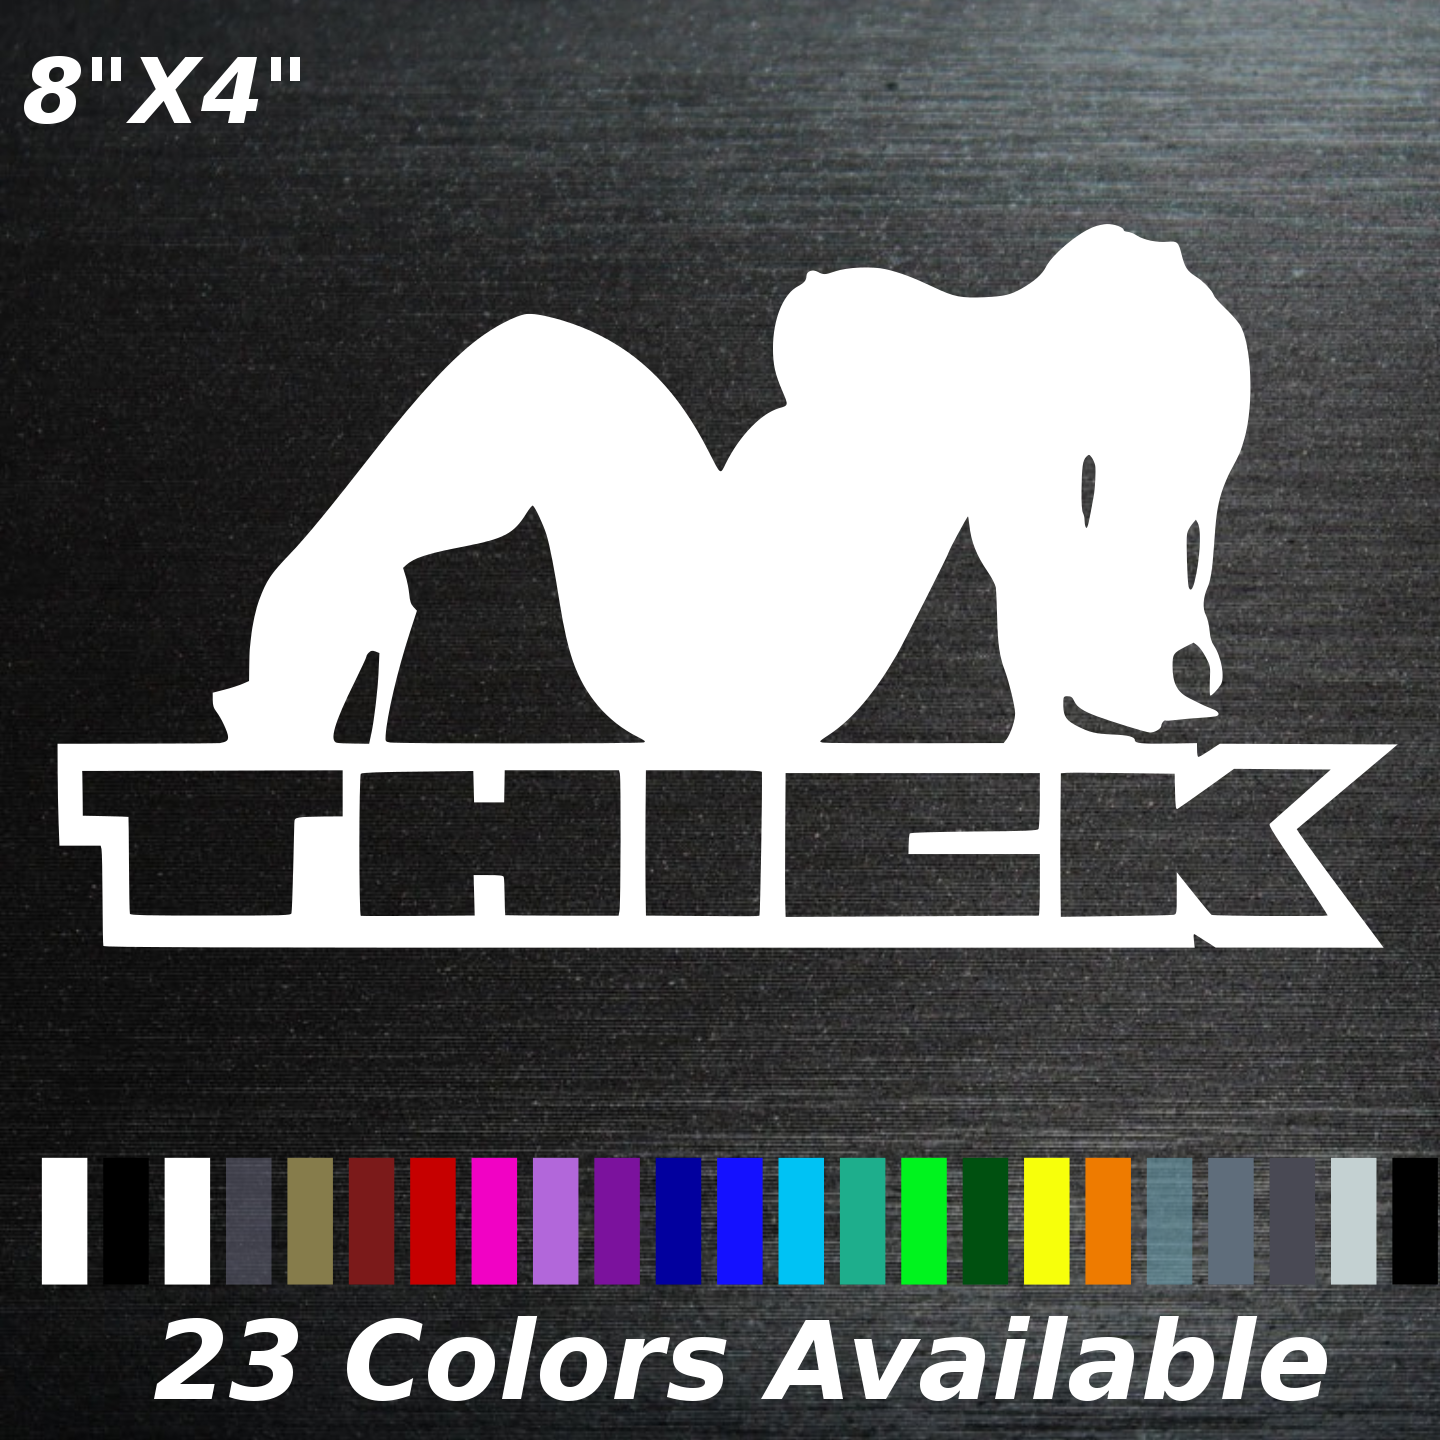 Show full-size image of Thick mudflap girl Sticker decal sexy chick Big nak...